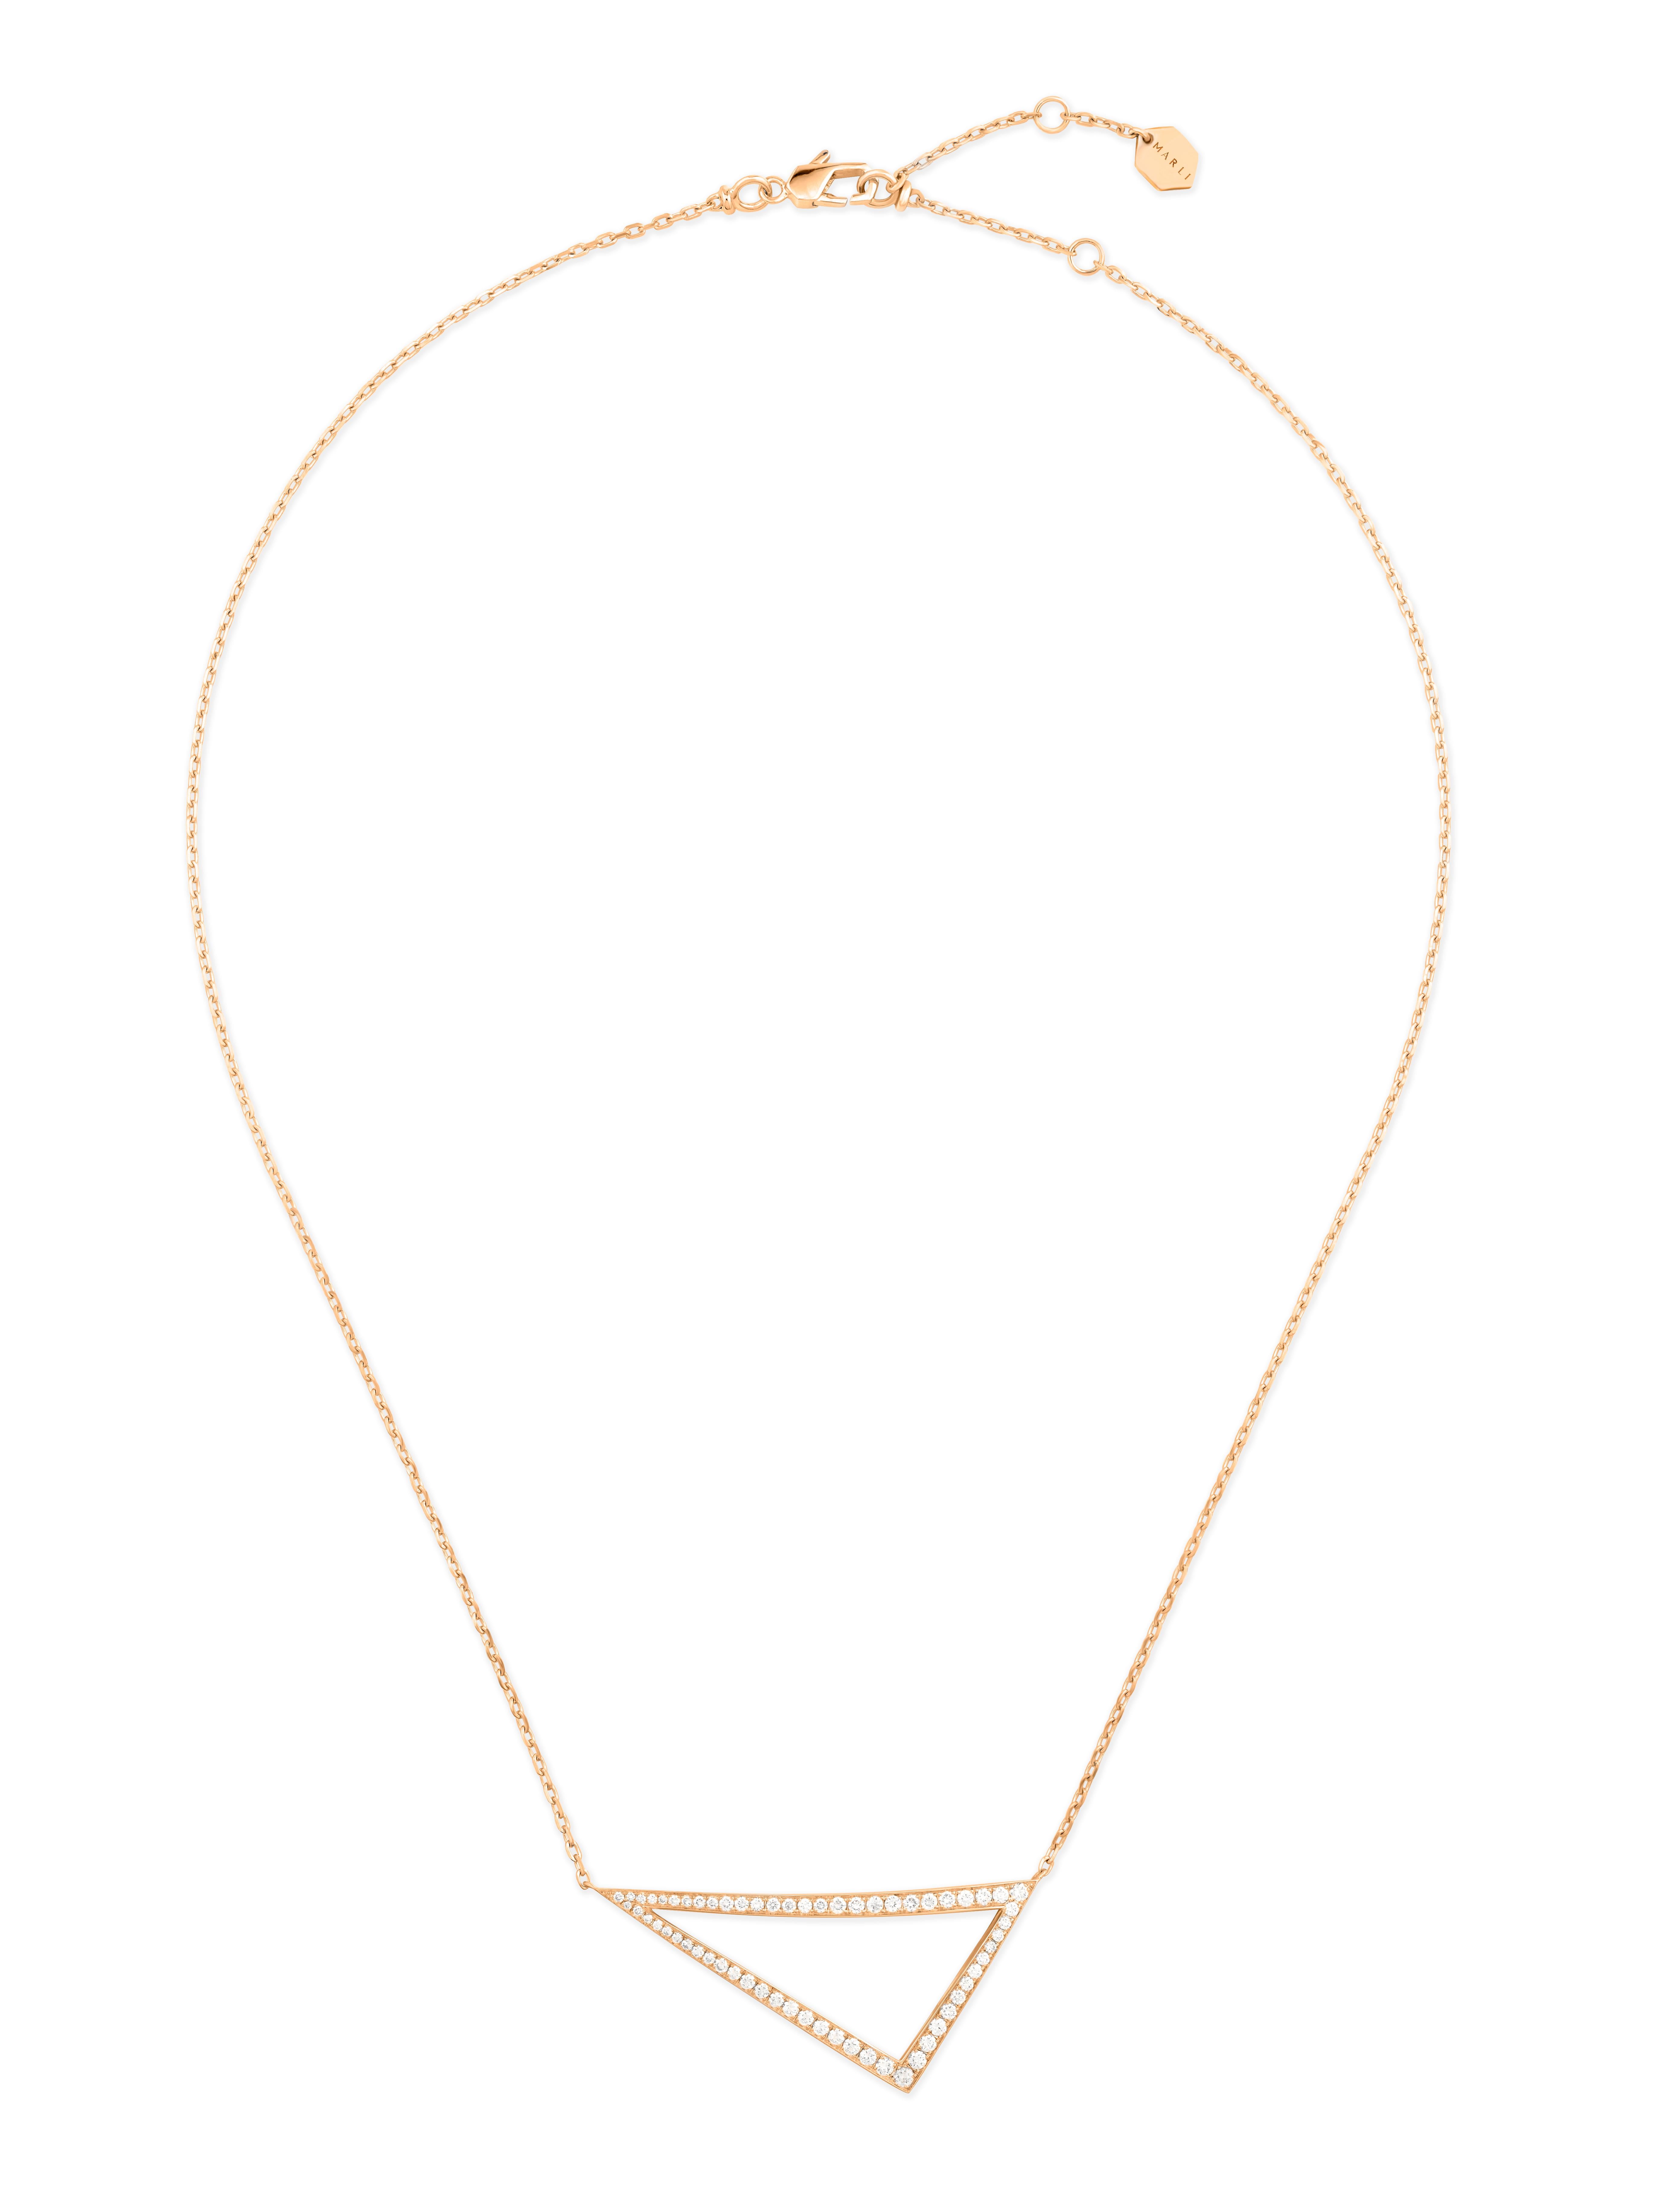 Inspired by the interplay of shadow and light of New York  City’s architecture, the Dahlia Chain Necklace is available in 18K white, rose, and yellow gold.